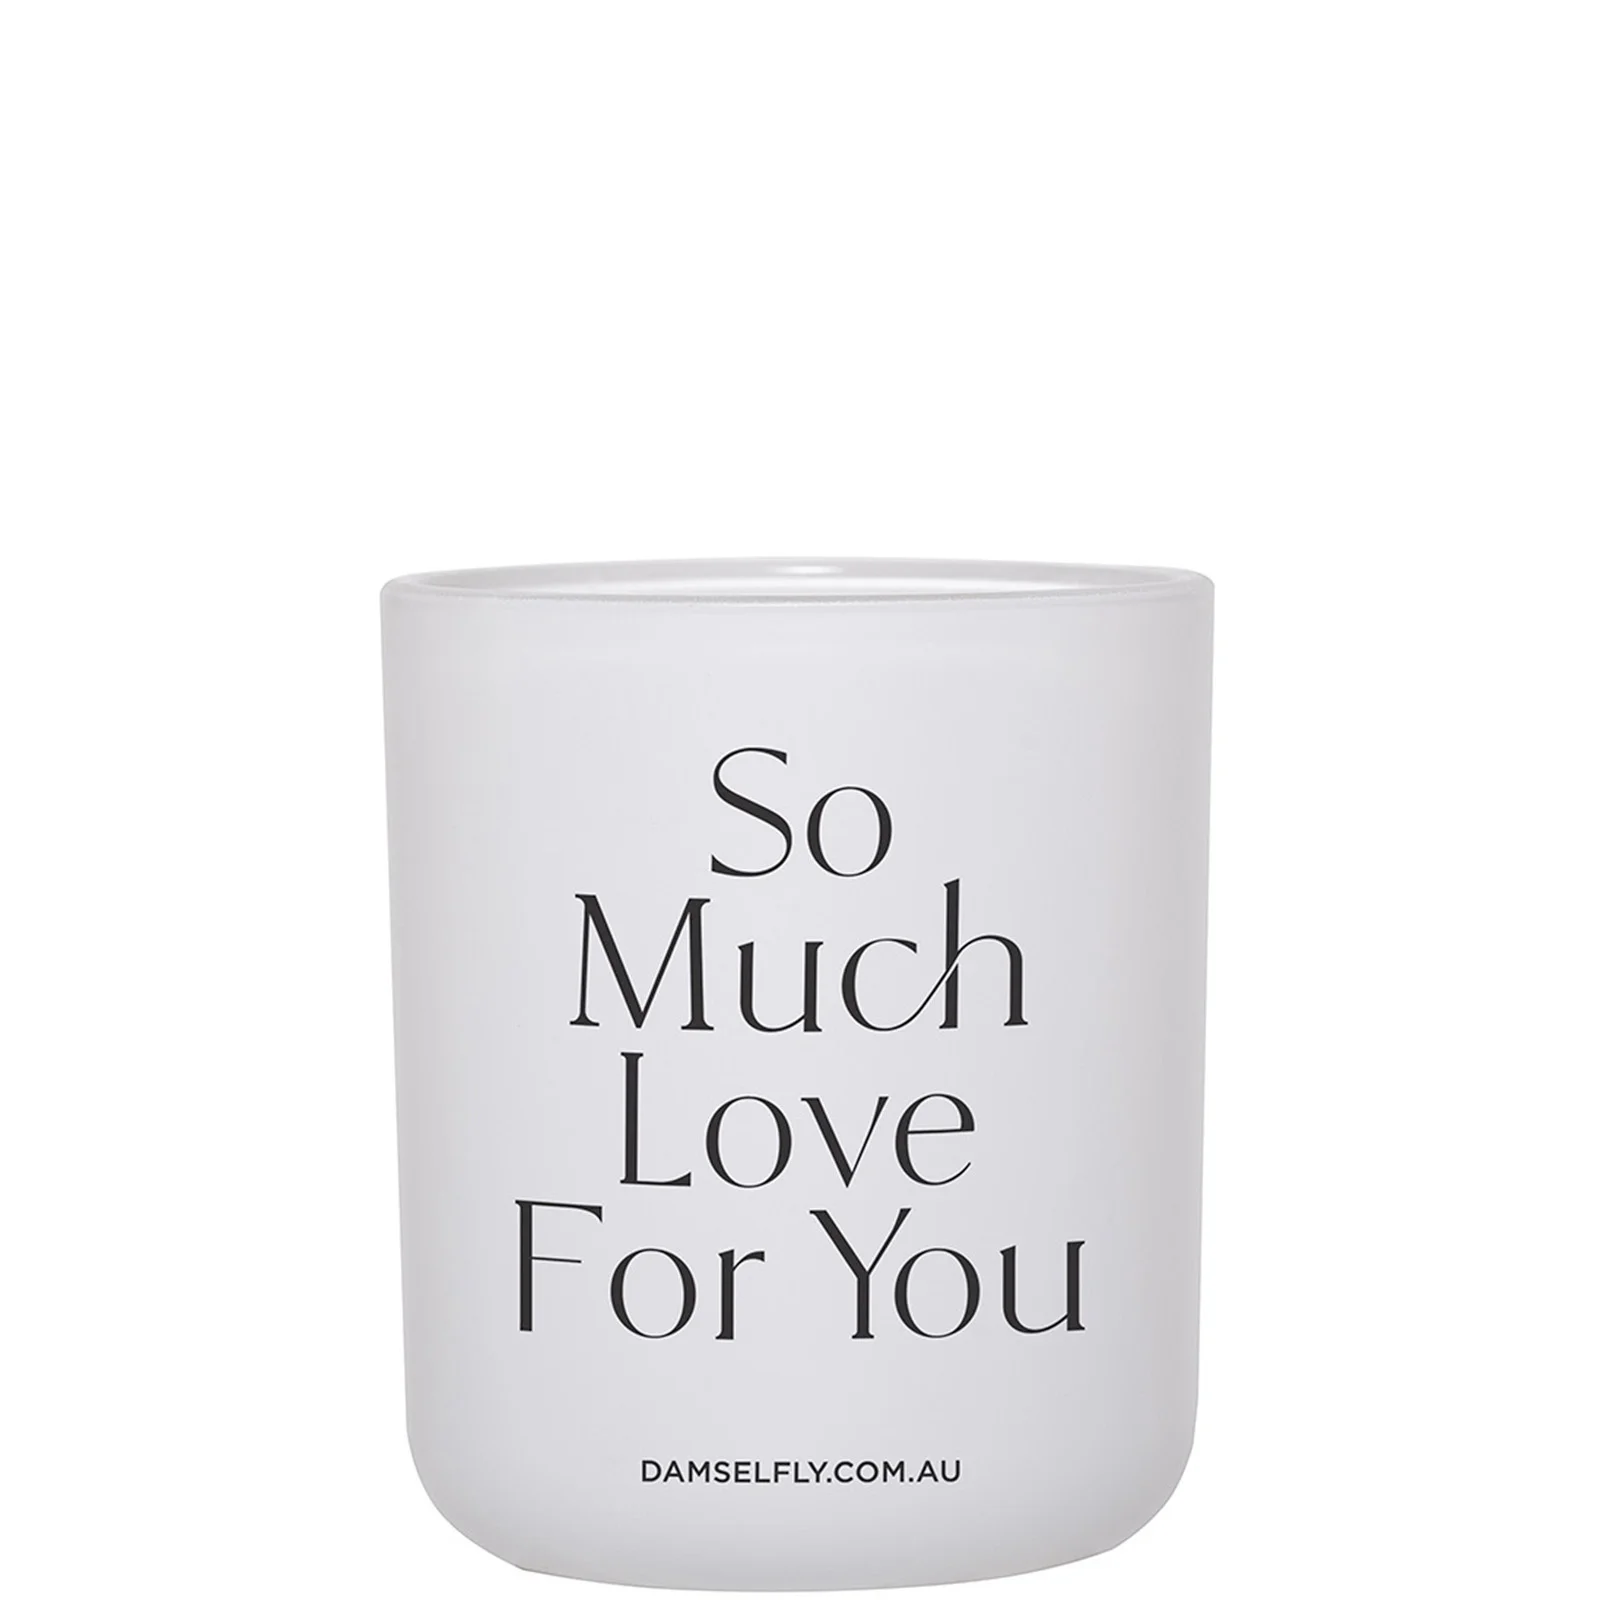 Damselfly So Much Love Scented Candle - 300g Image 1